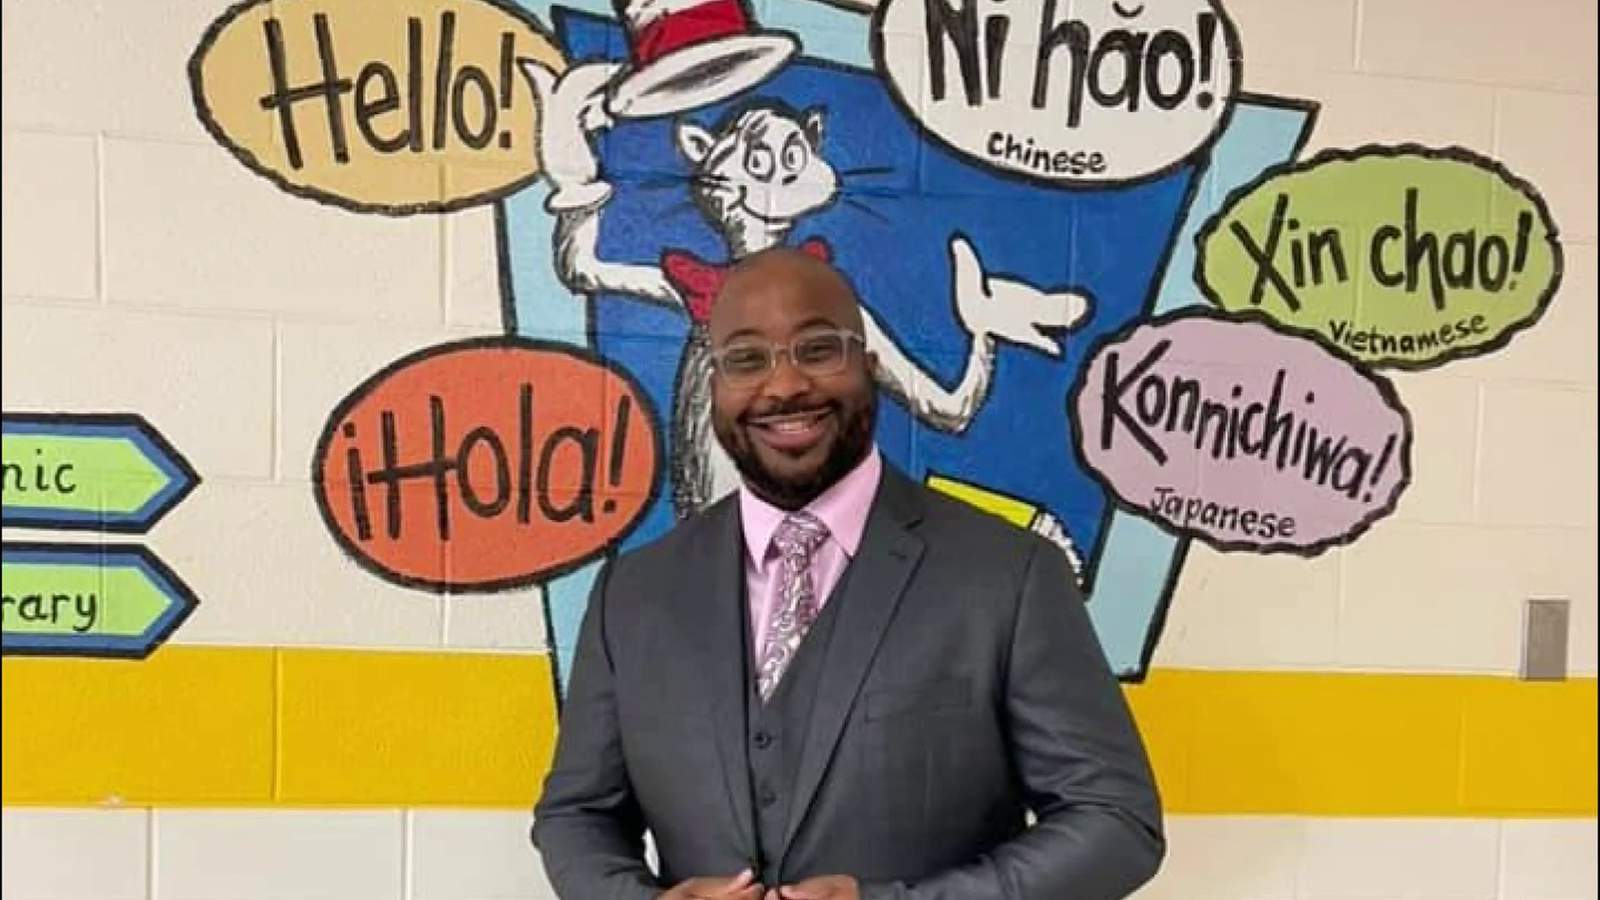 Virginia Teacher of Year Anthony Swann continues to inspire students, community through education